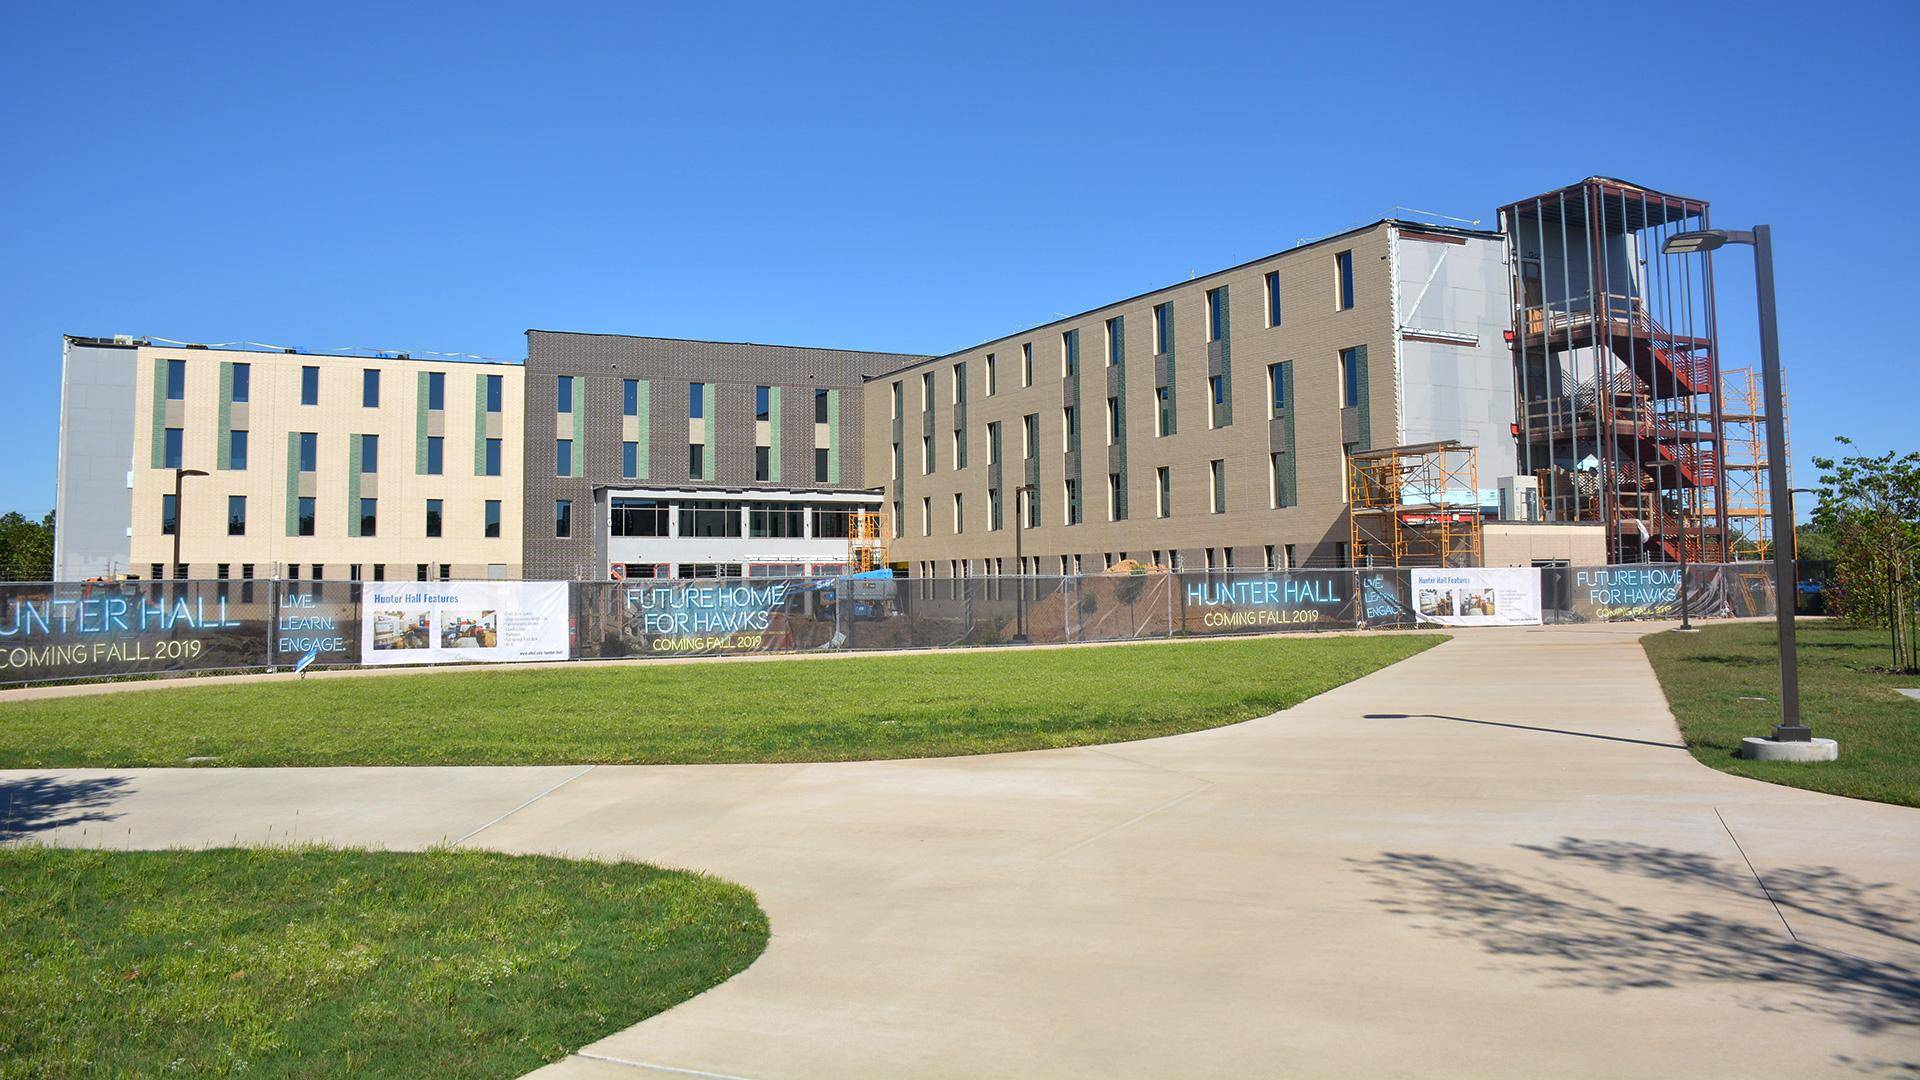 UHCL residence hall opens in August for fall semester